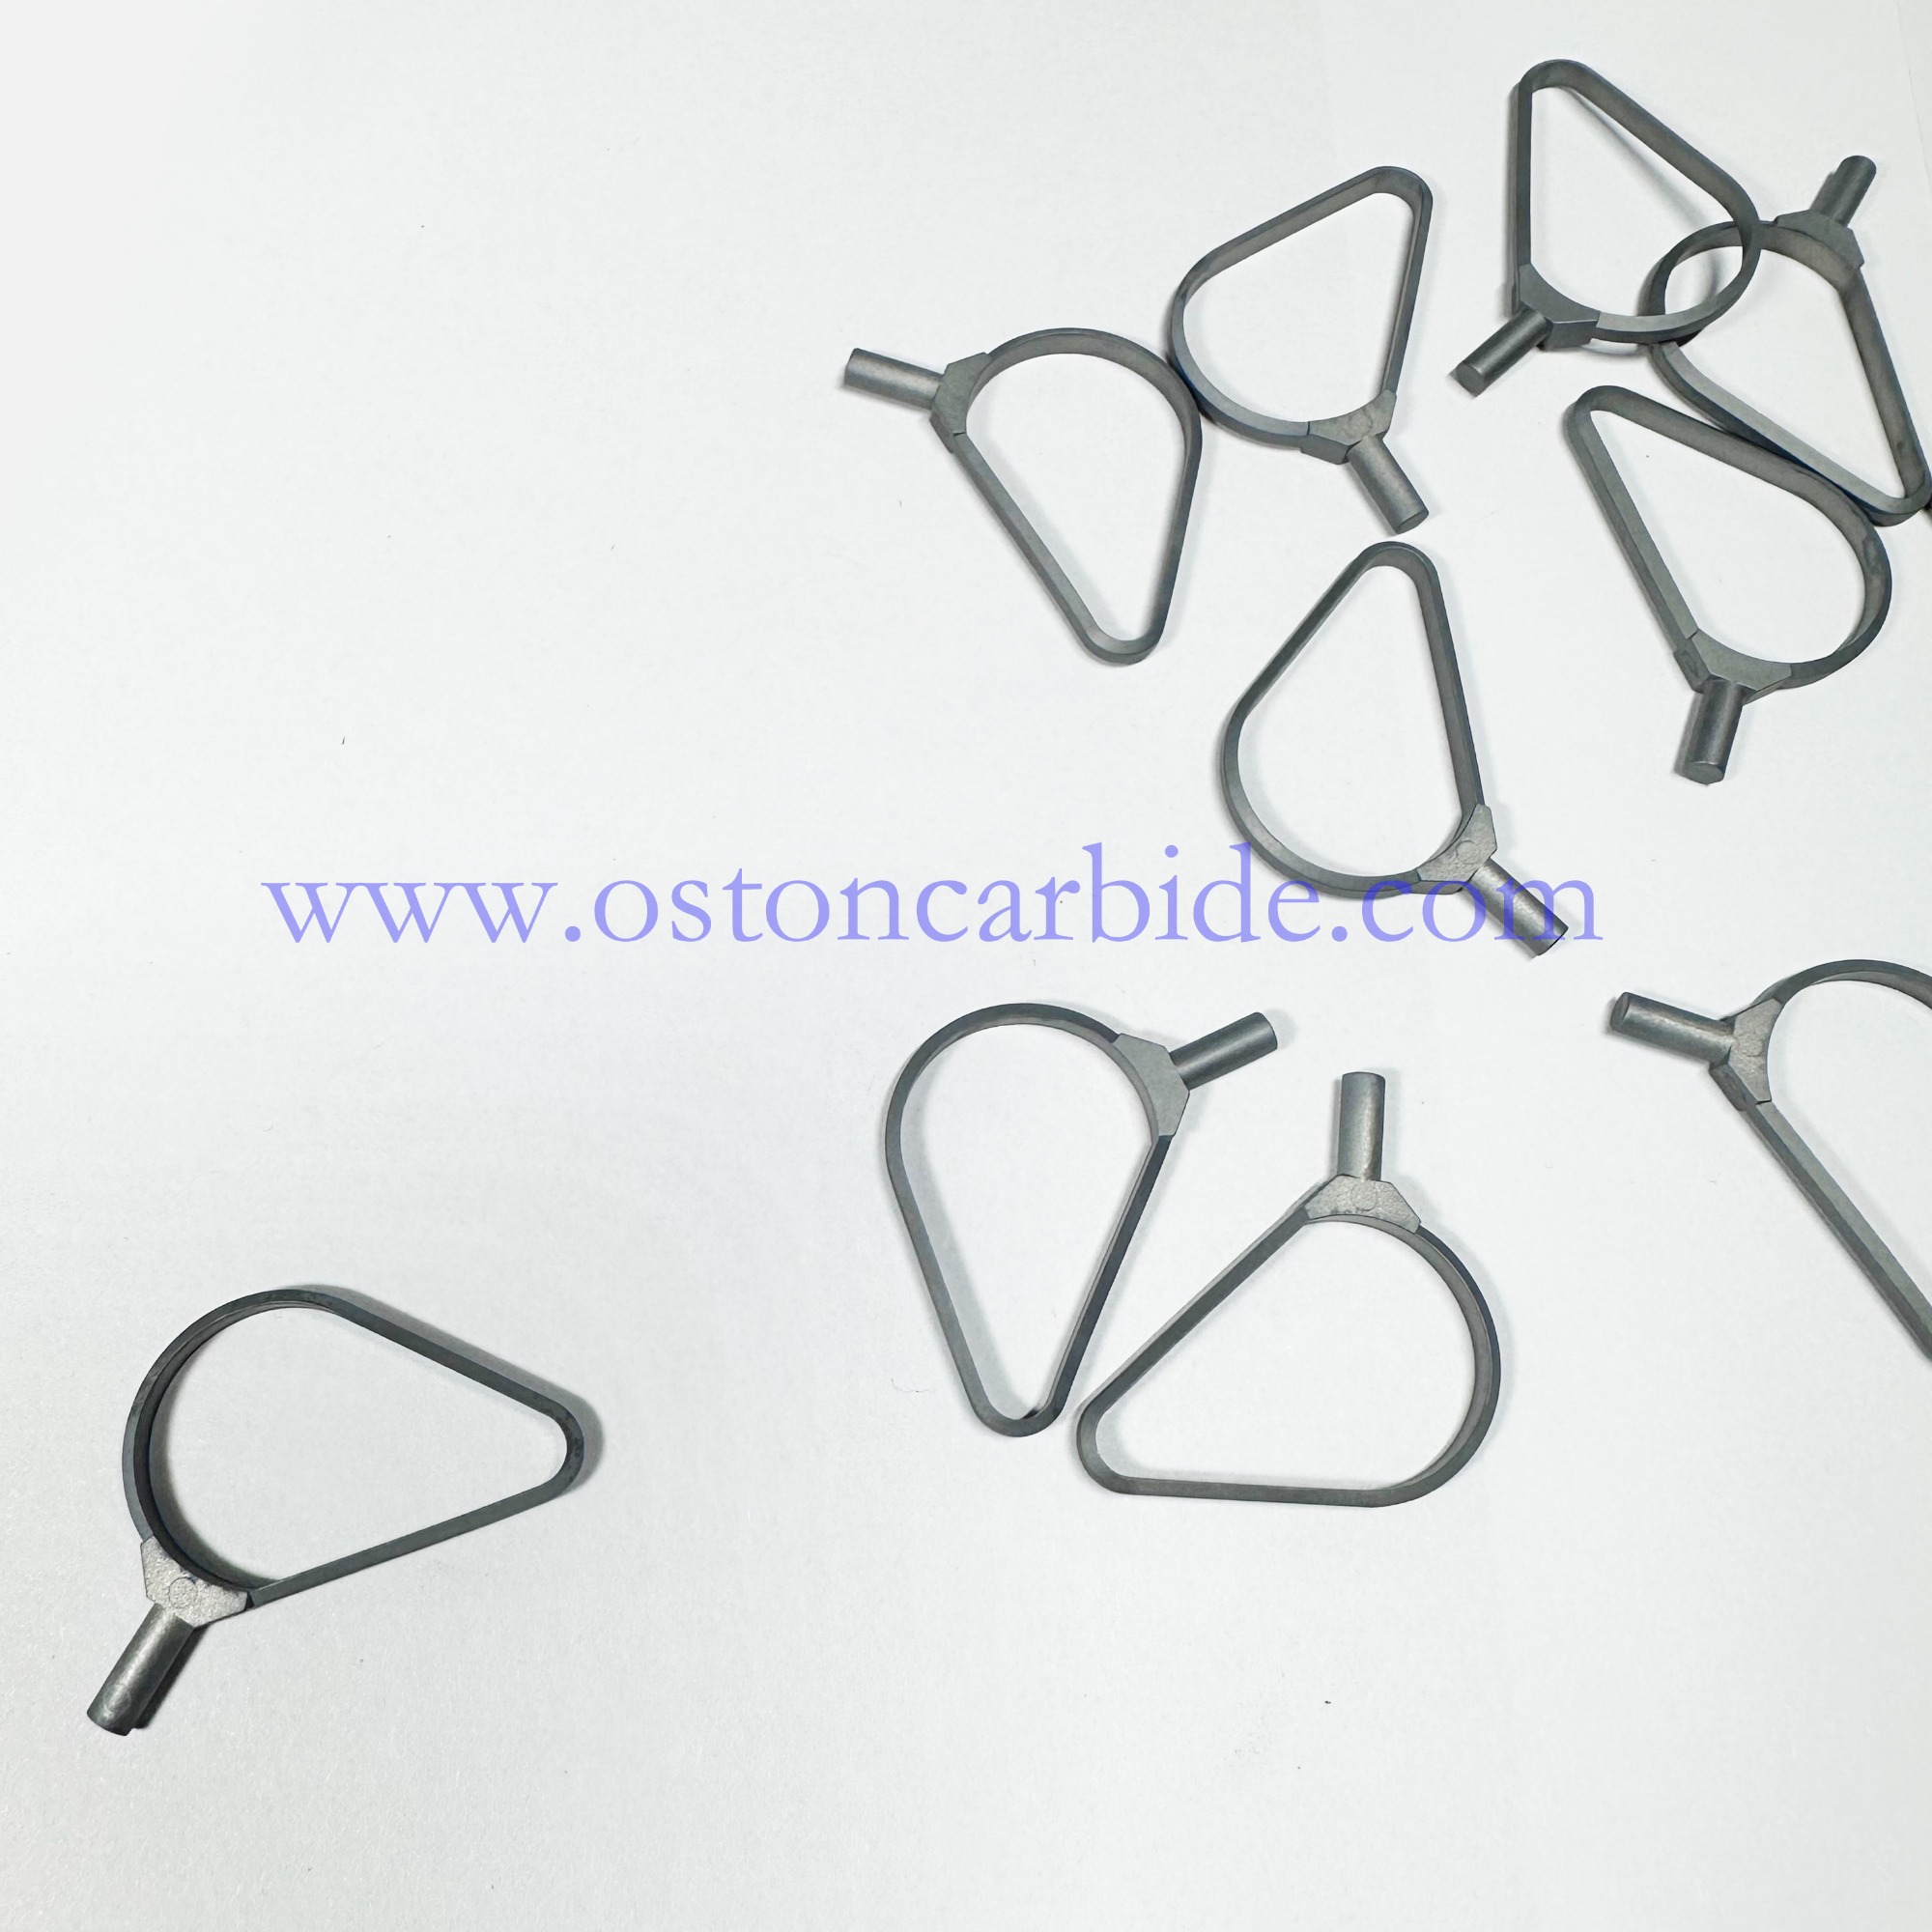 Hard Metal Pottery Trimming and Chattering Tools, Tungsten Carbide Pottery Trimming Cutter